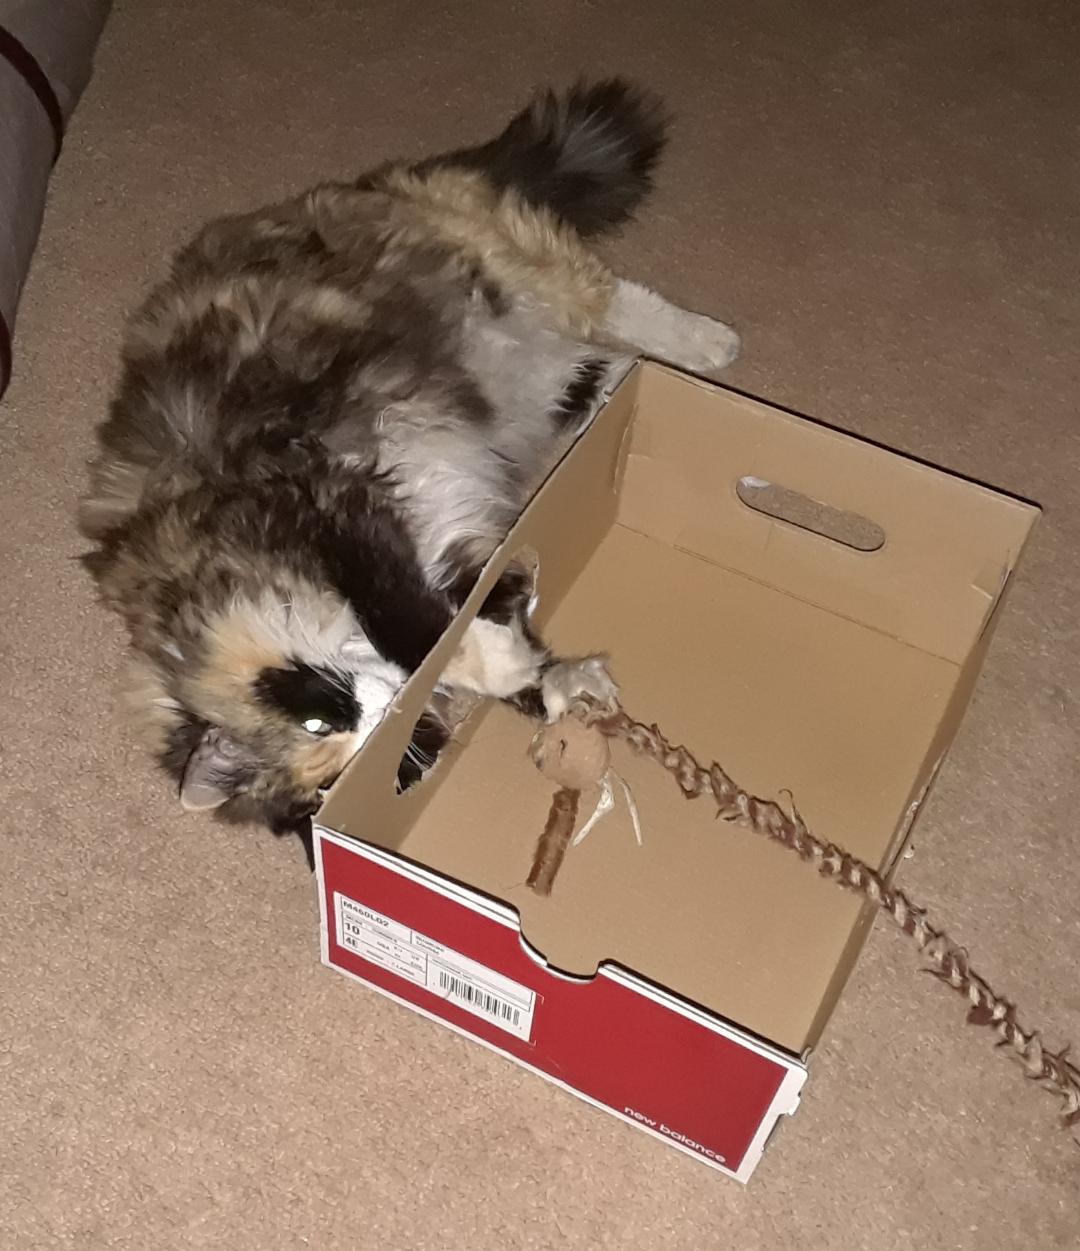 Cut a hole in the side of the shoe box and Lulu has a new box to play in.